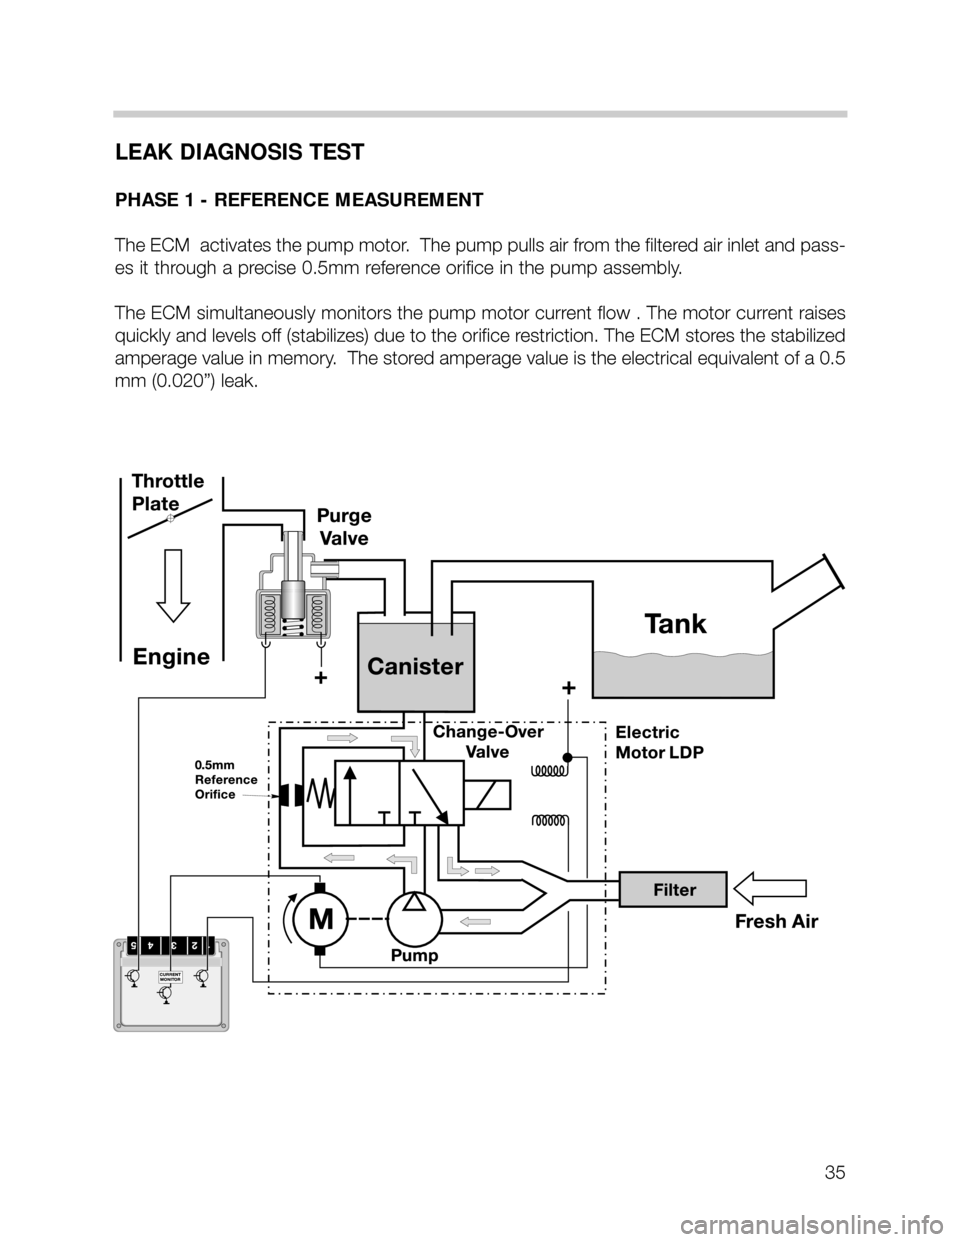 BMW 740i 1999 E38 M62TU Engine Owners Guide LEAK DIAGNOSIS TEST
PHASE 1 - REFERENCE MEASUREMENT
The ECM  activates the pump motor.  The pump pulls air from the filtered air inlet and pass-
es it through a precise 0.5mm reference orifice in the 